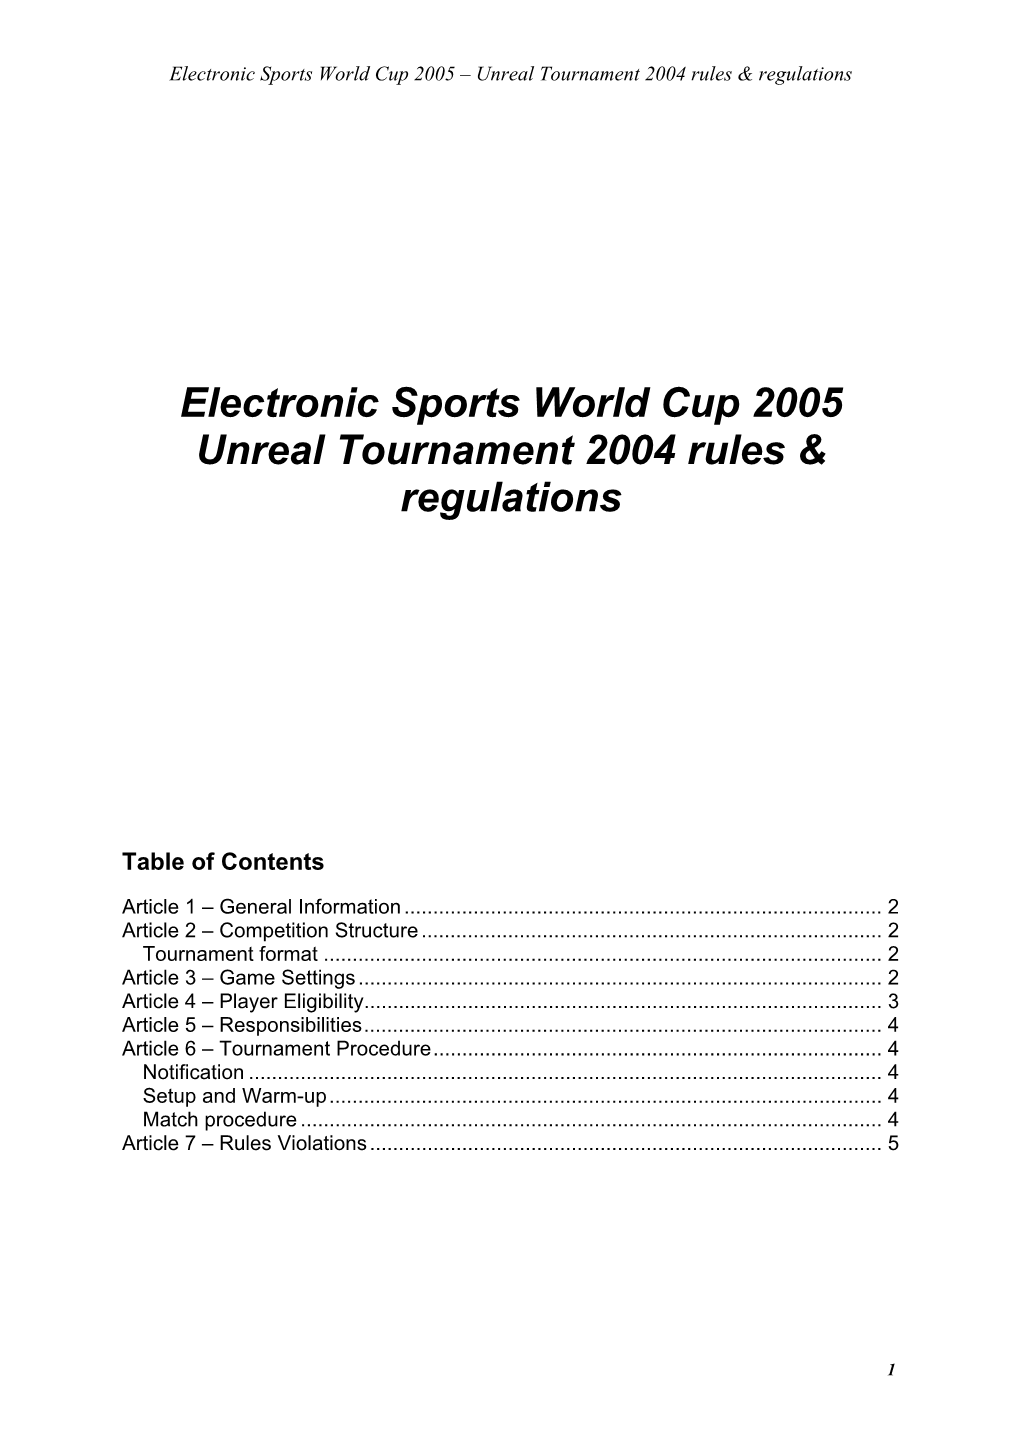 Electronic Sports World Cup 2005 Unreal Tournament 2004 Rules & Regulations